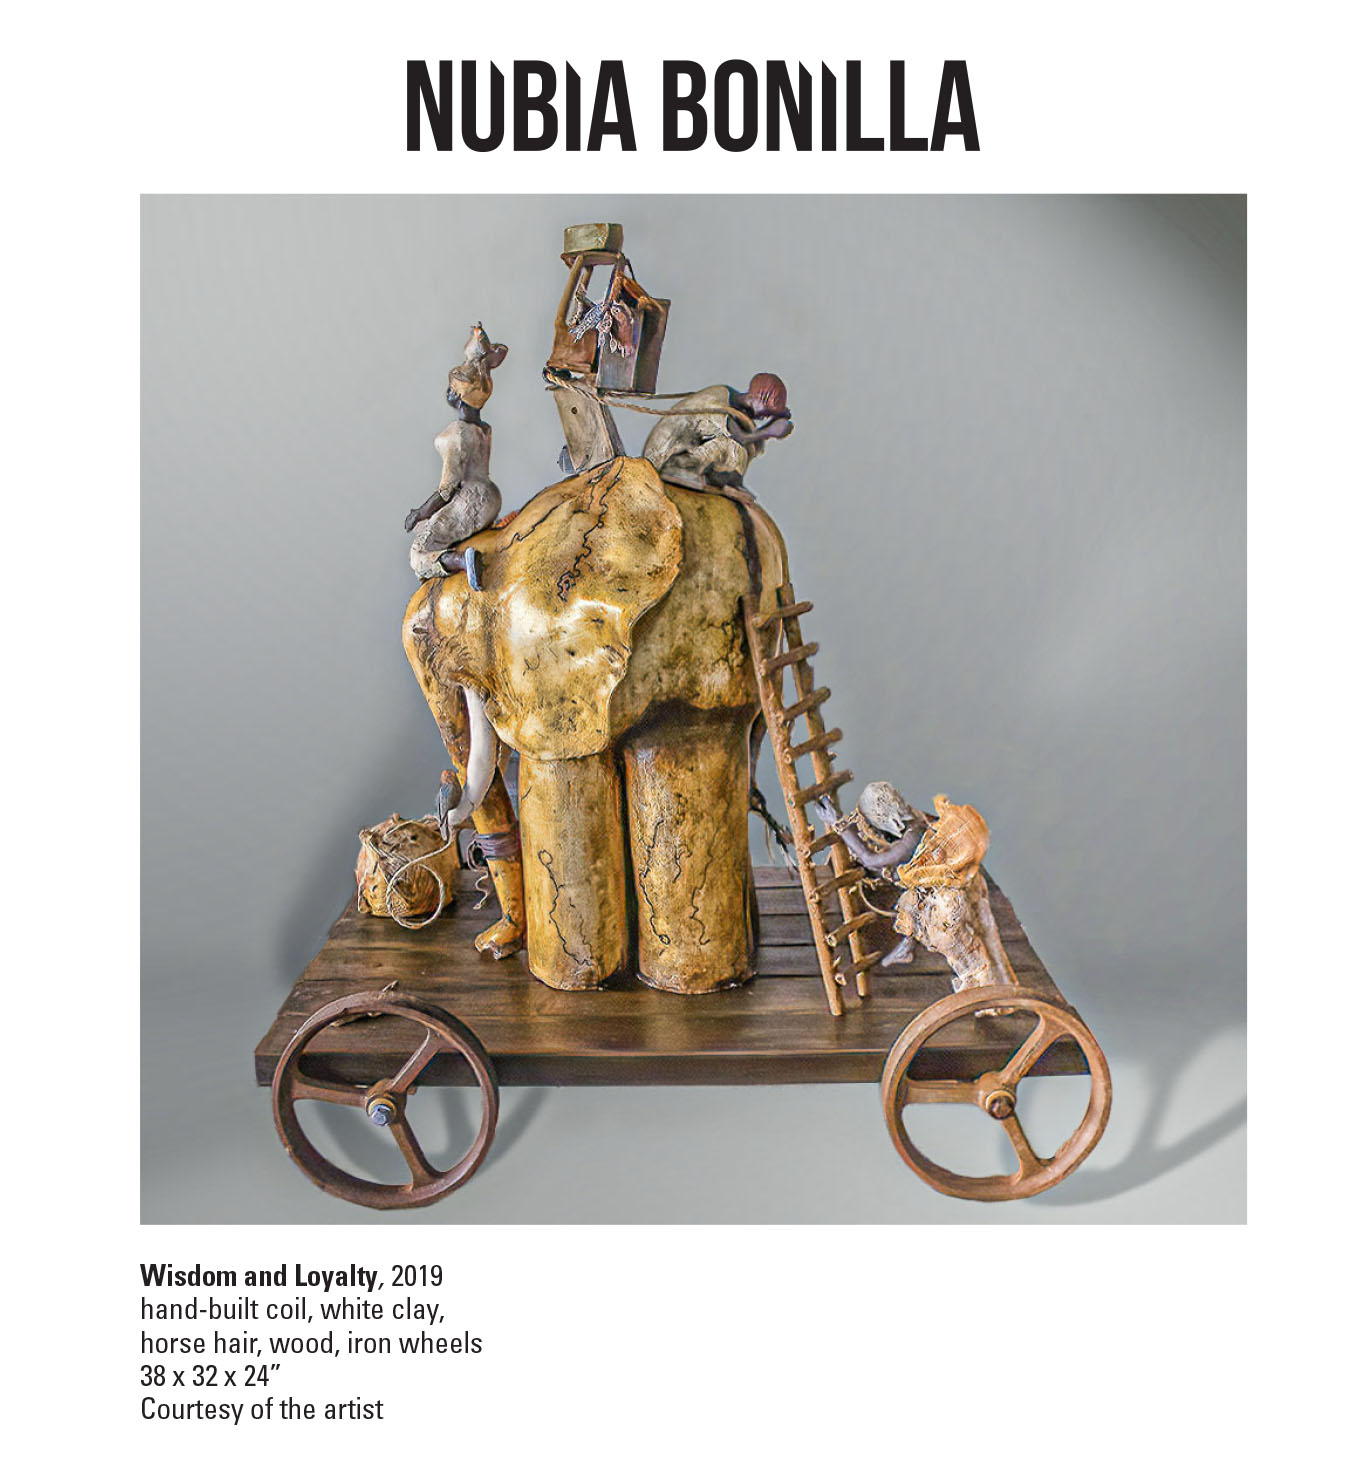 Nubia Bonilla, Wisdom and Loyalty, 2019. Hand-built coil, white clay, horse hair, wood, iron wheels. 38 x 32 x24" Courtesy of the artist. Human figures are crawling over an elephant on top of a cart